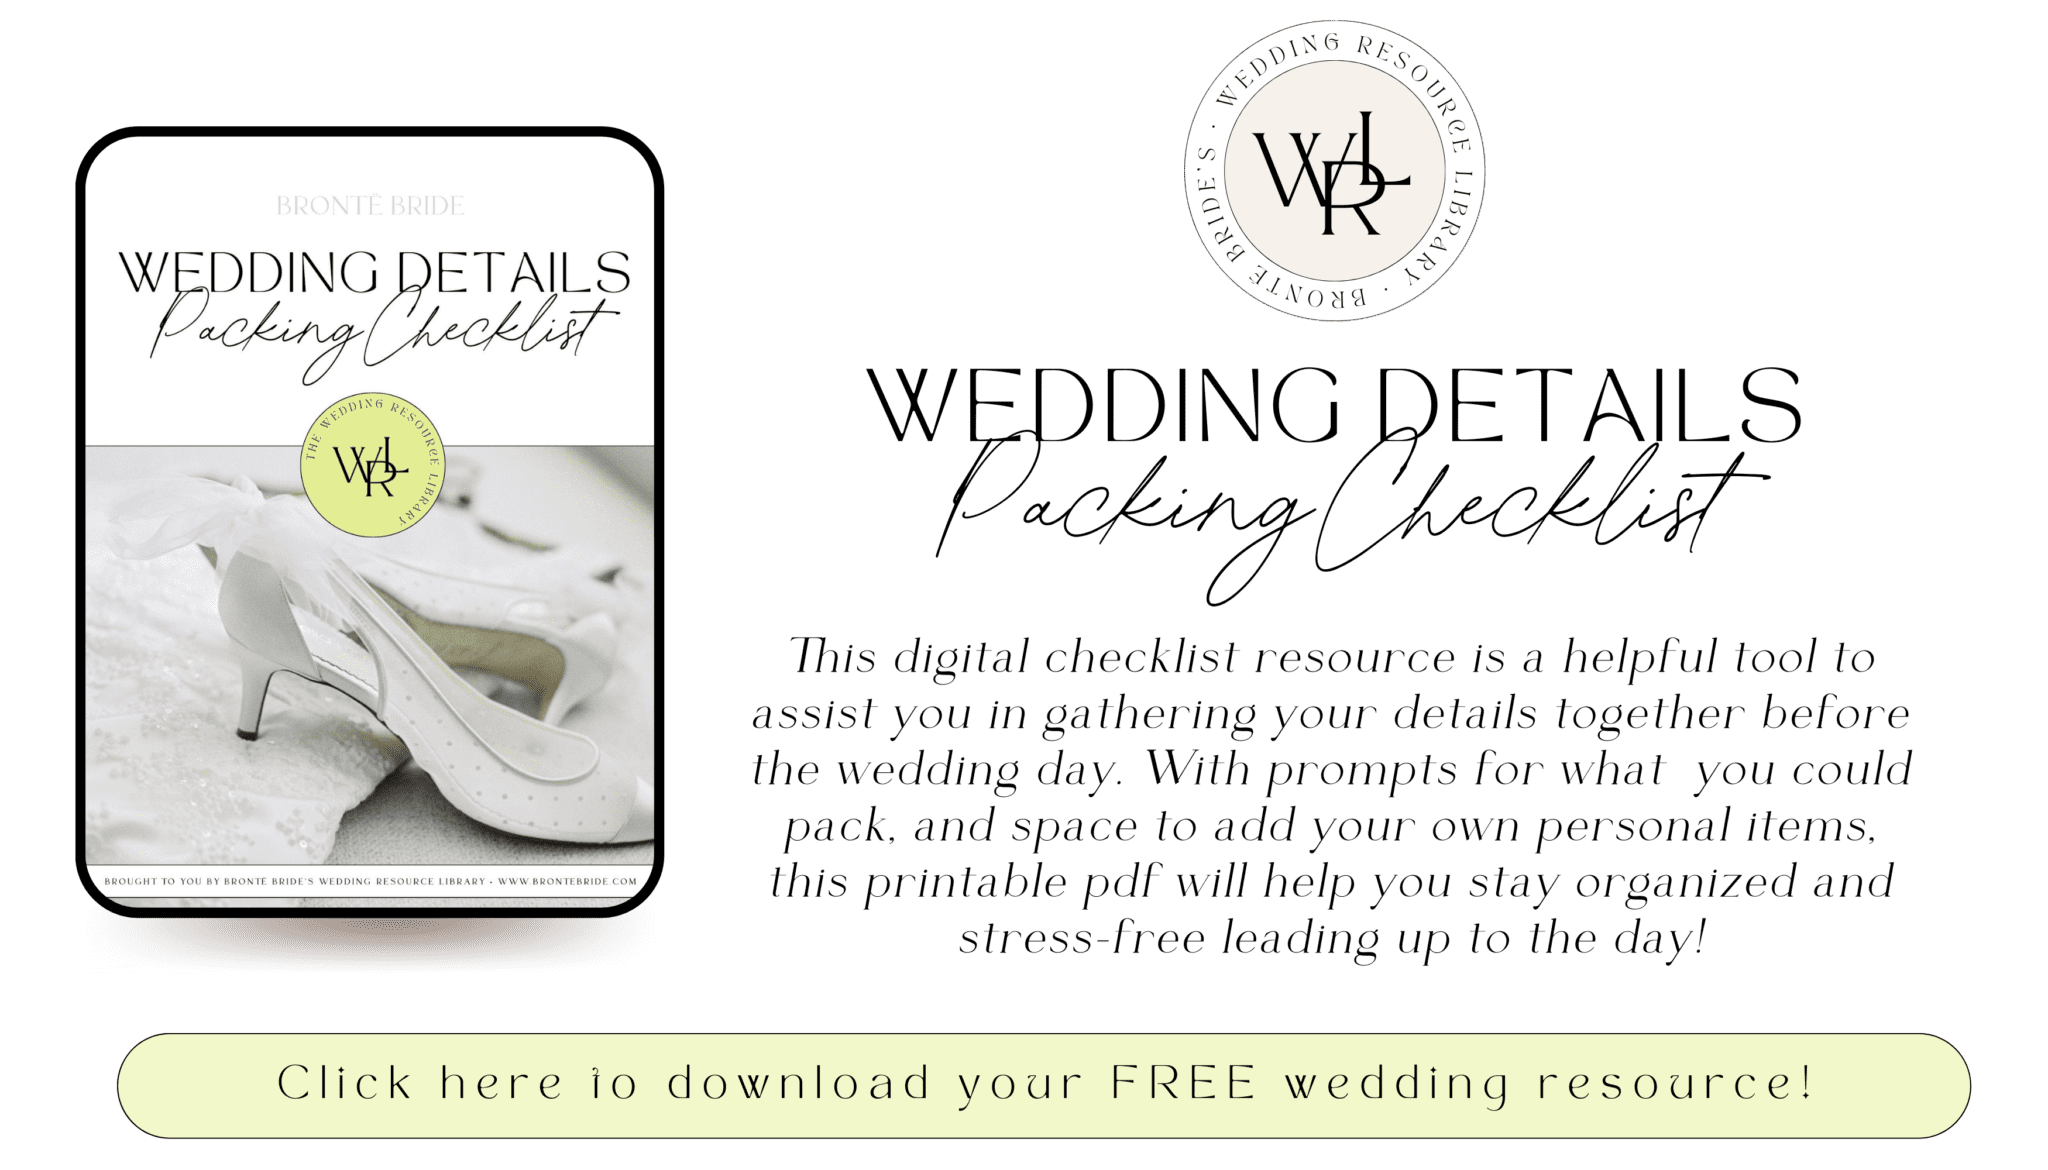 Brontë Bride's Wedding Resource Library - Wedding Details Packing Checklist // Sharing helpful wedding planning tools, checklists, and resources for engaged couples across Canada.